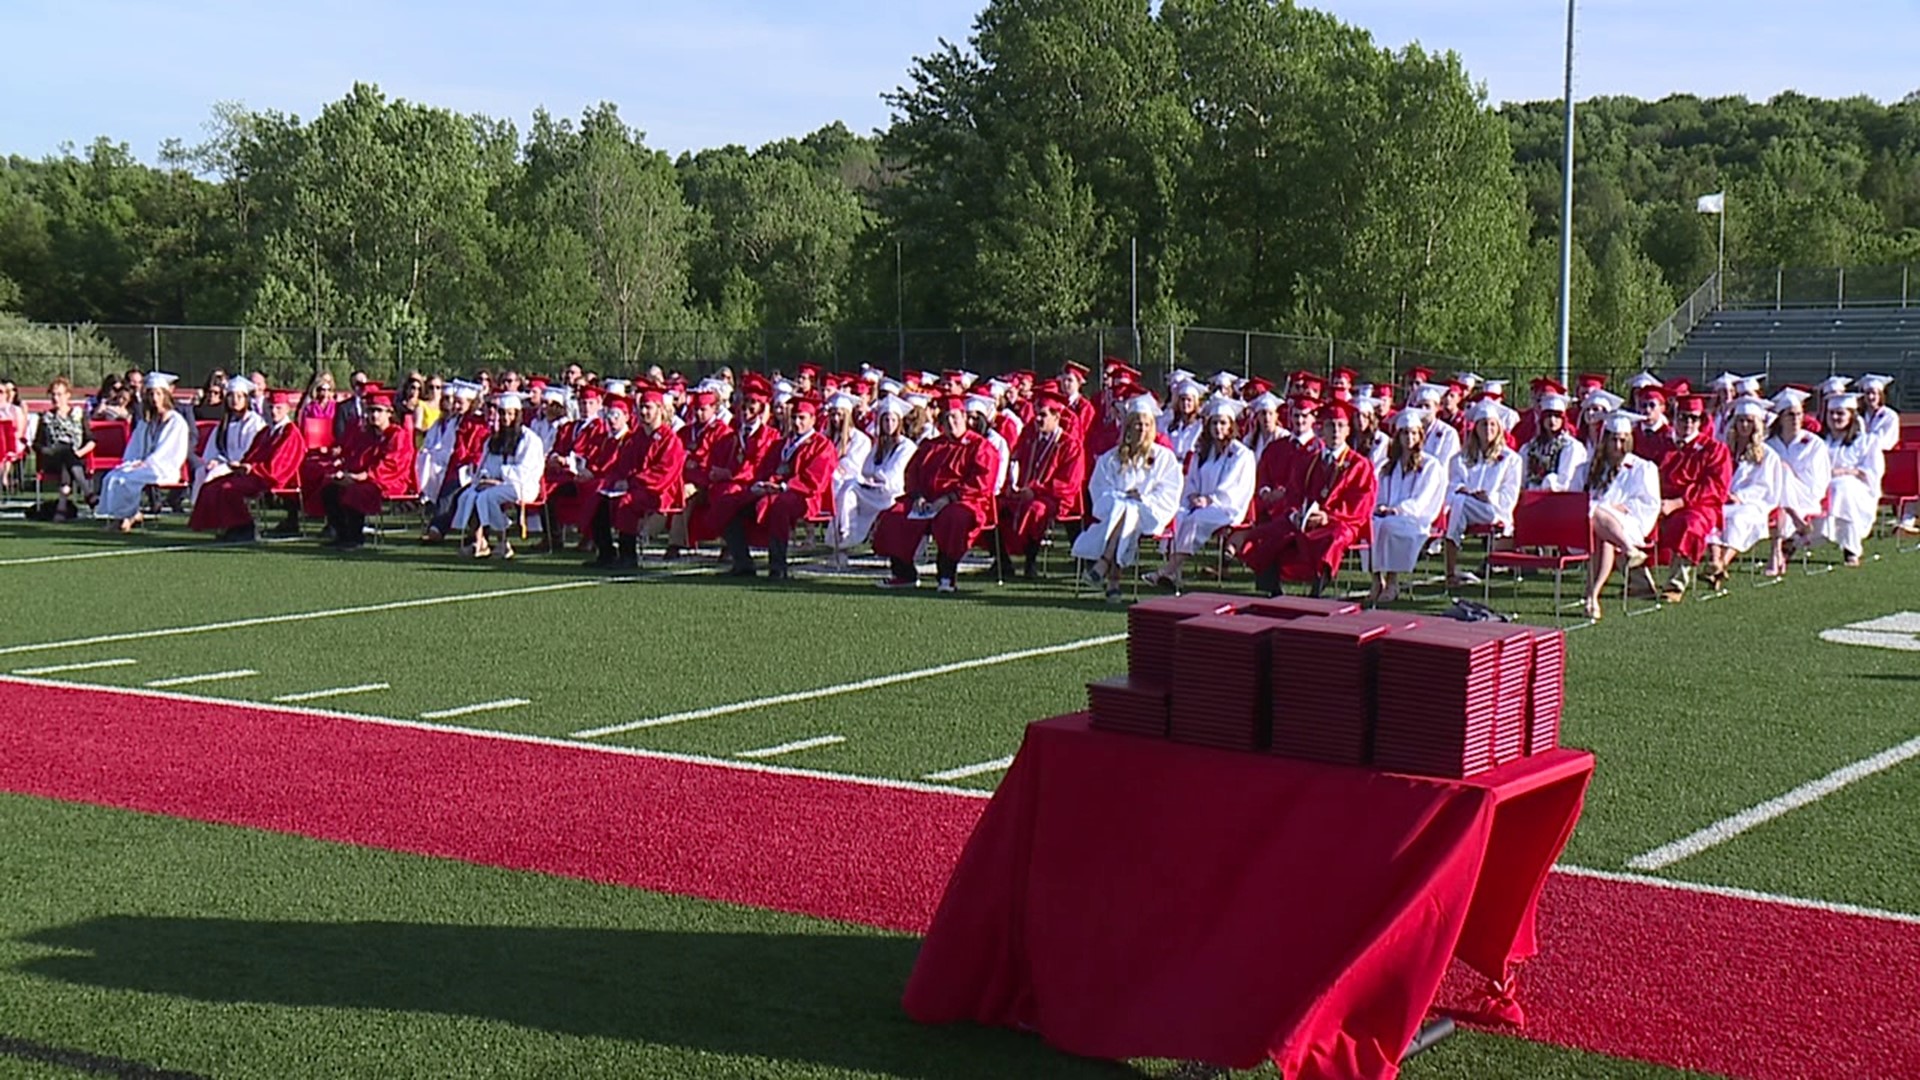 The crowd at North Pocono High School definitely had double the fun as seven sets of twins graduated on Friday.